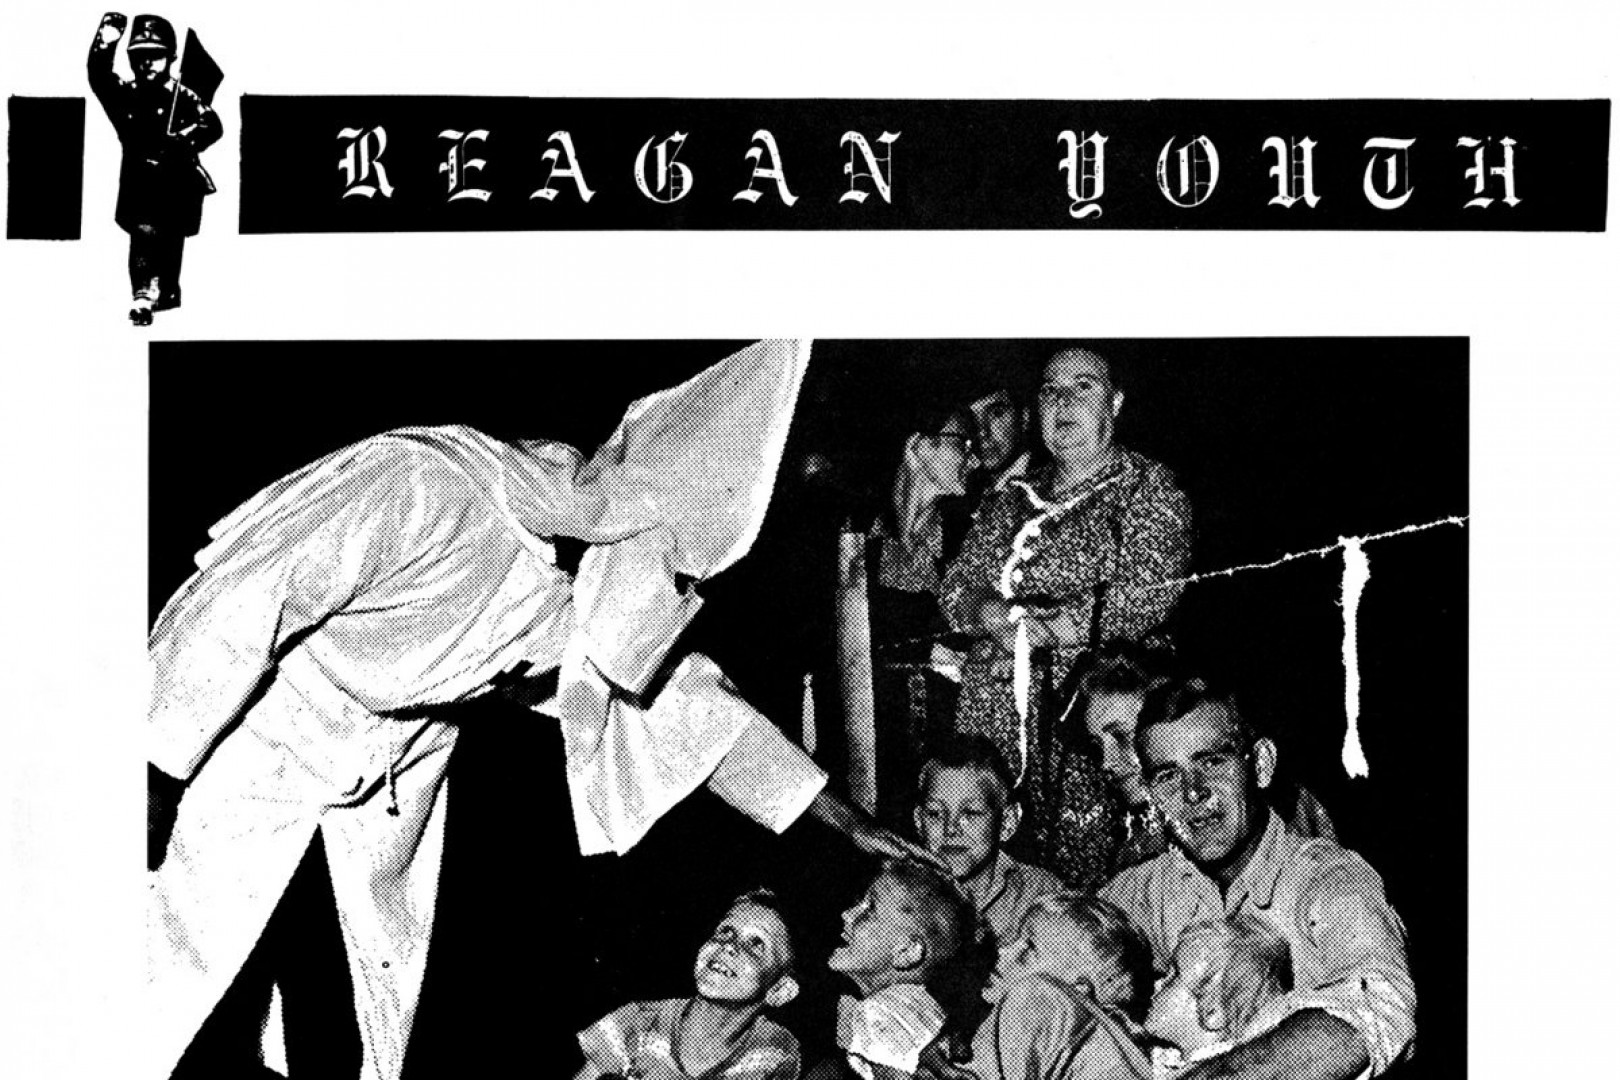 Reagan Youth release 'The 171A Demo 1981' 7-inch